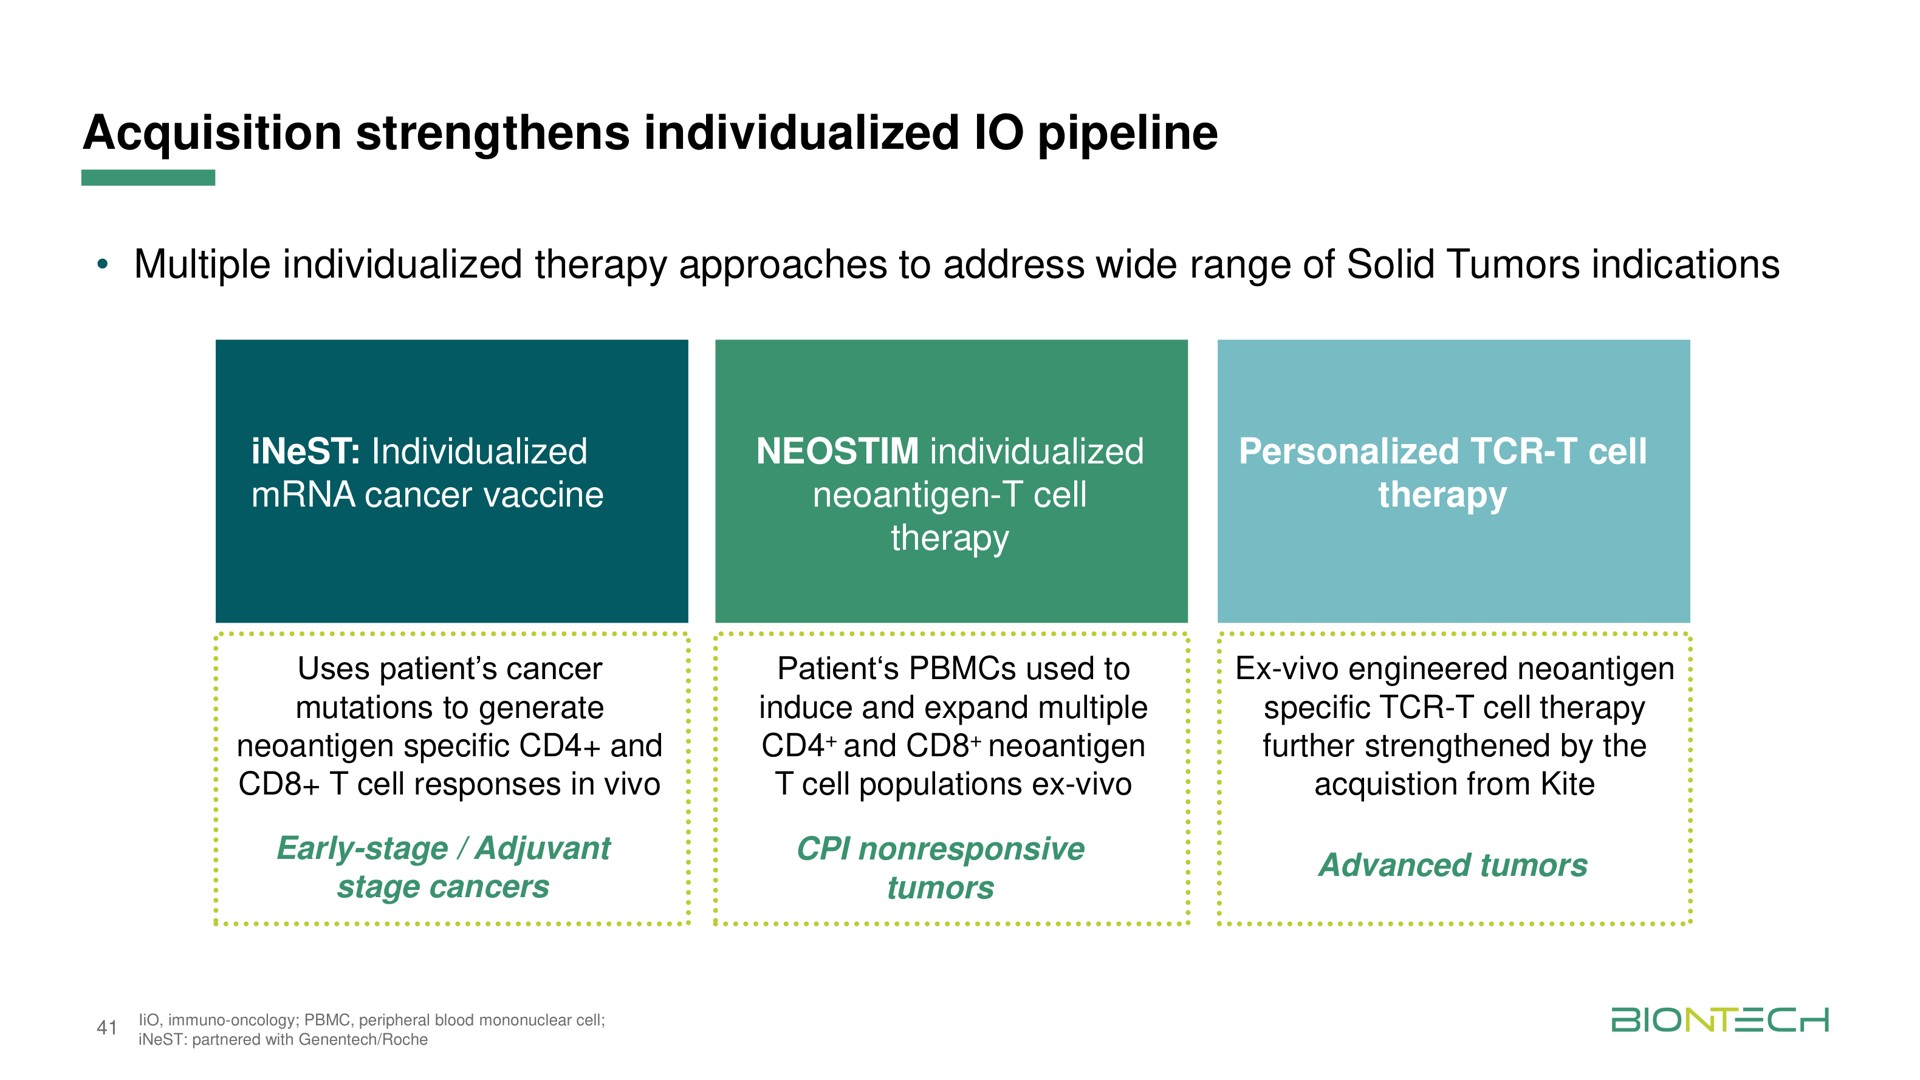 acquisition strengthens individualized pipeline multiple individualized therapy approaches to address wide range of solid tumors indications | BioNTech